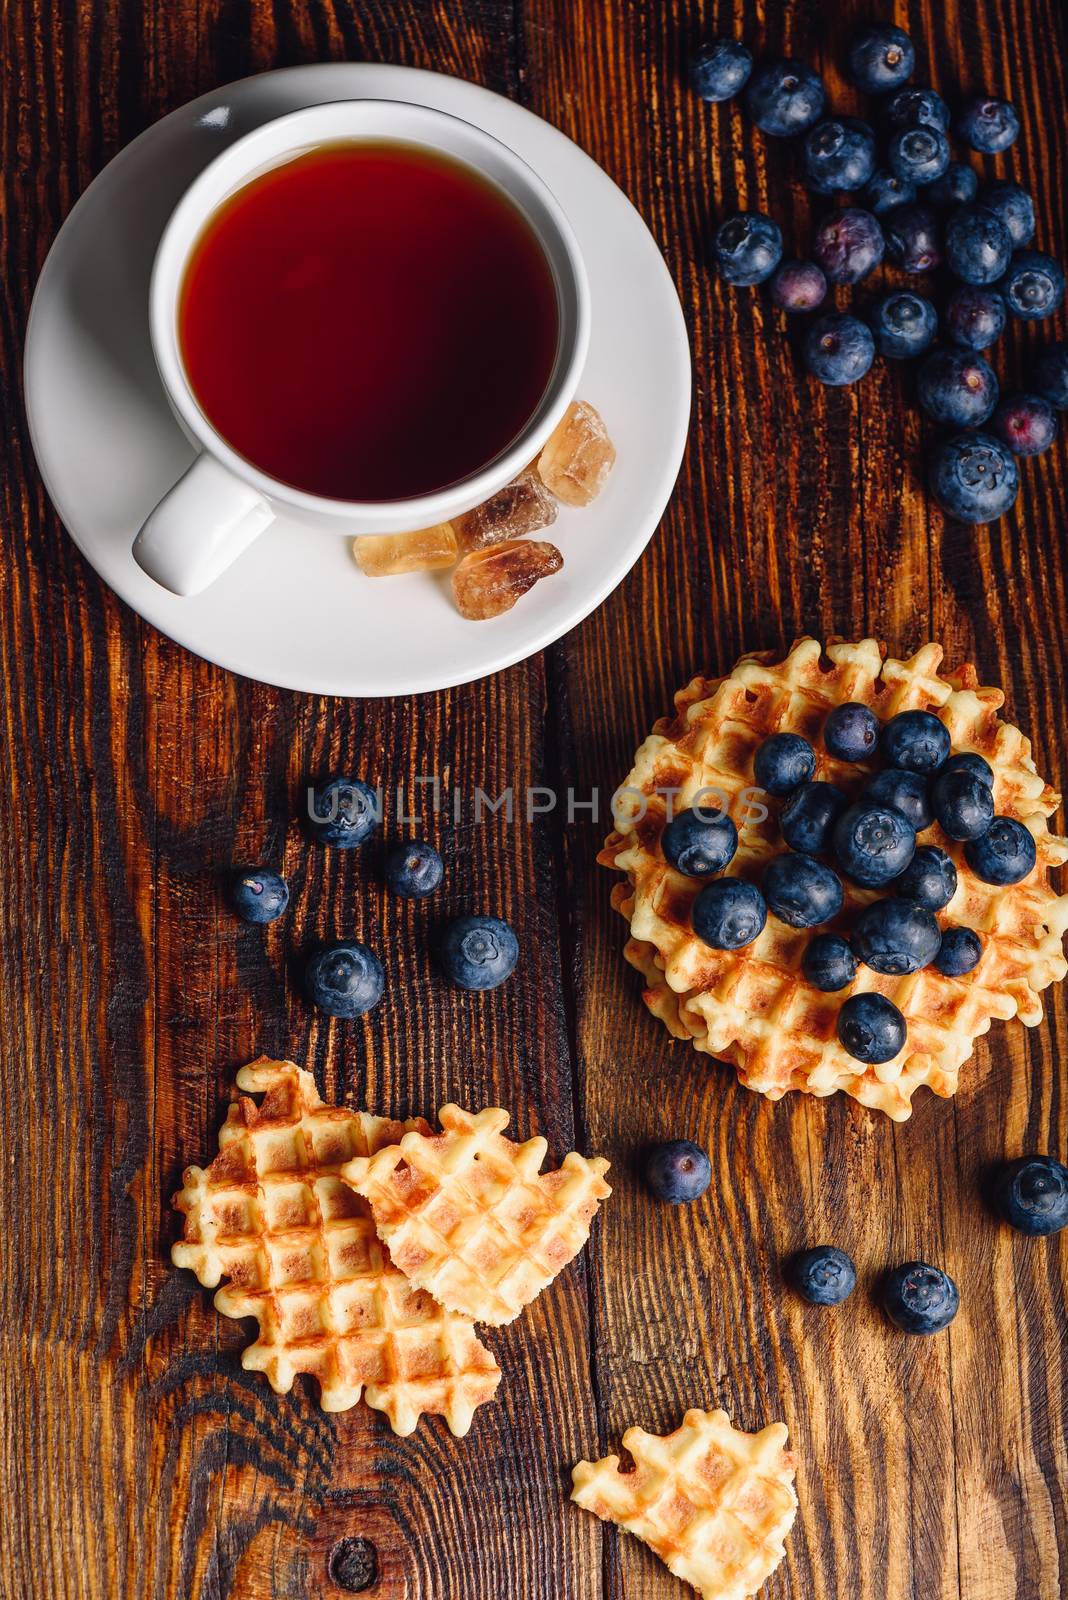 Cup of Tea with Belgian Waffles and Blueberries. by Seva_blsv